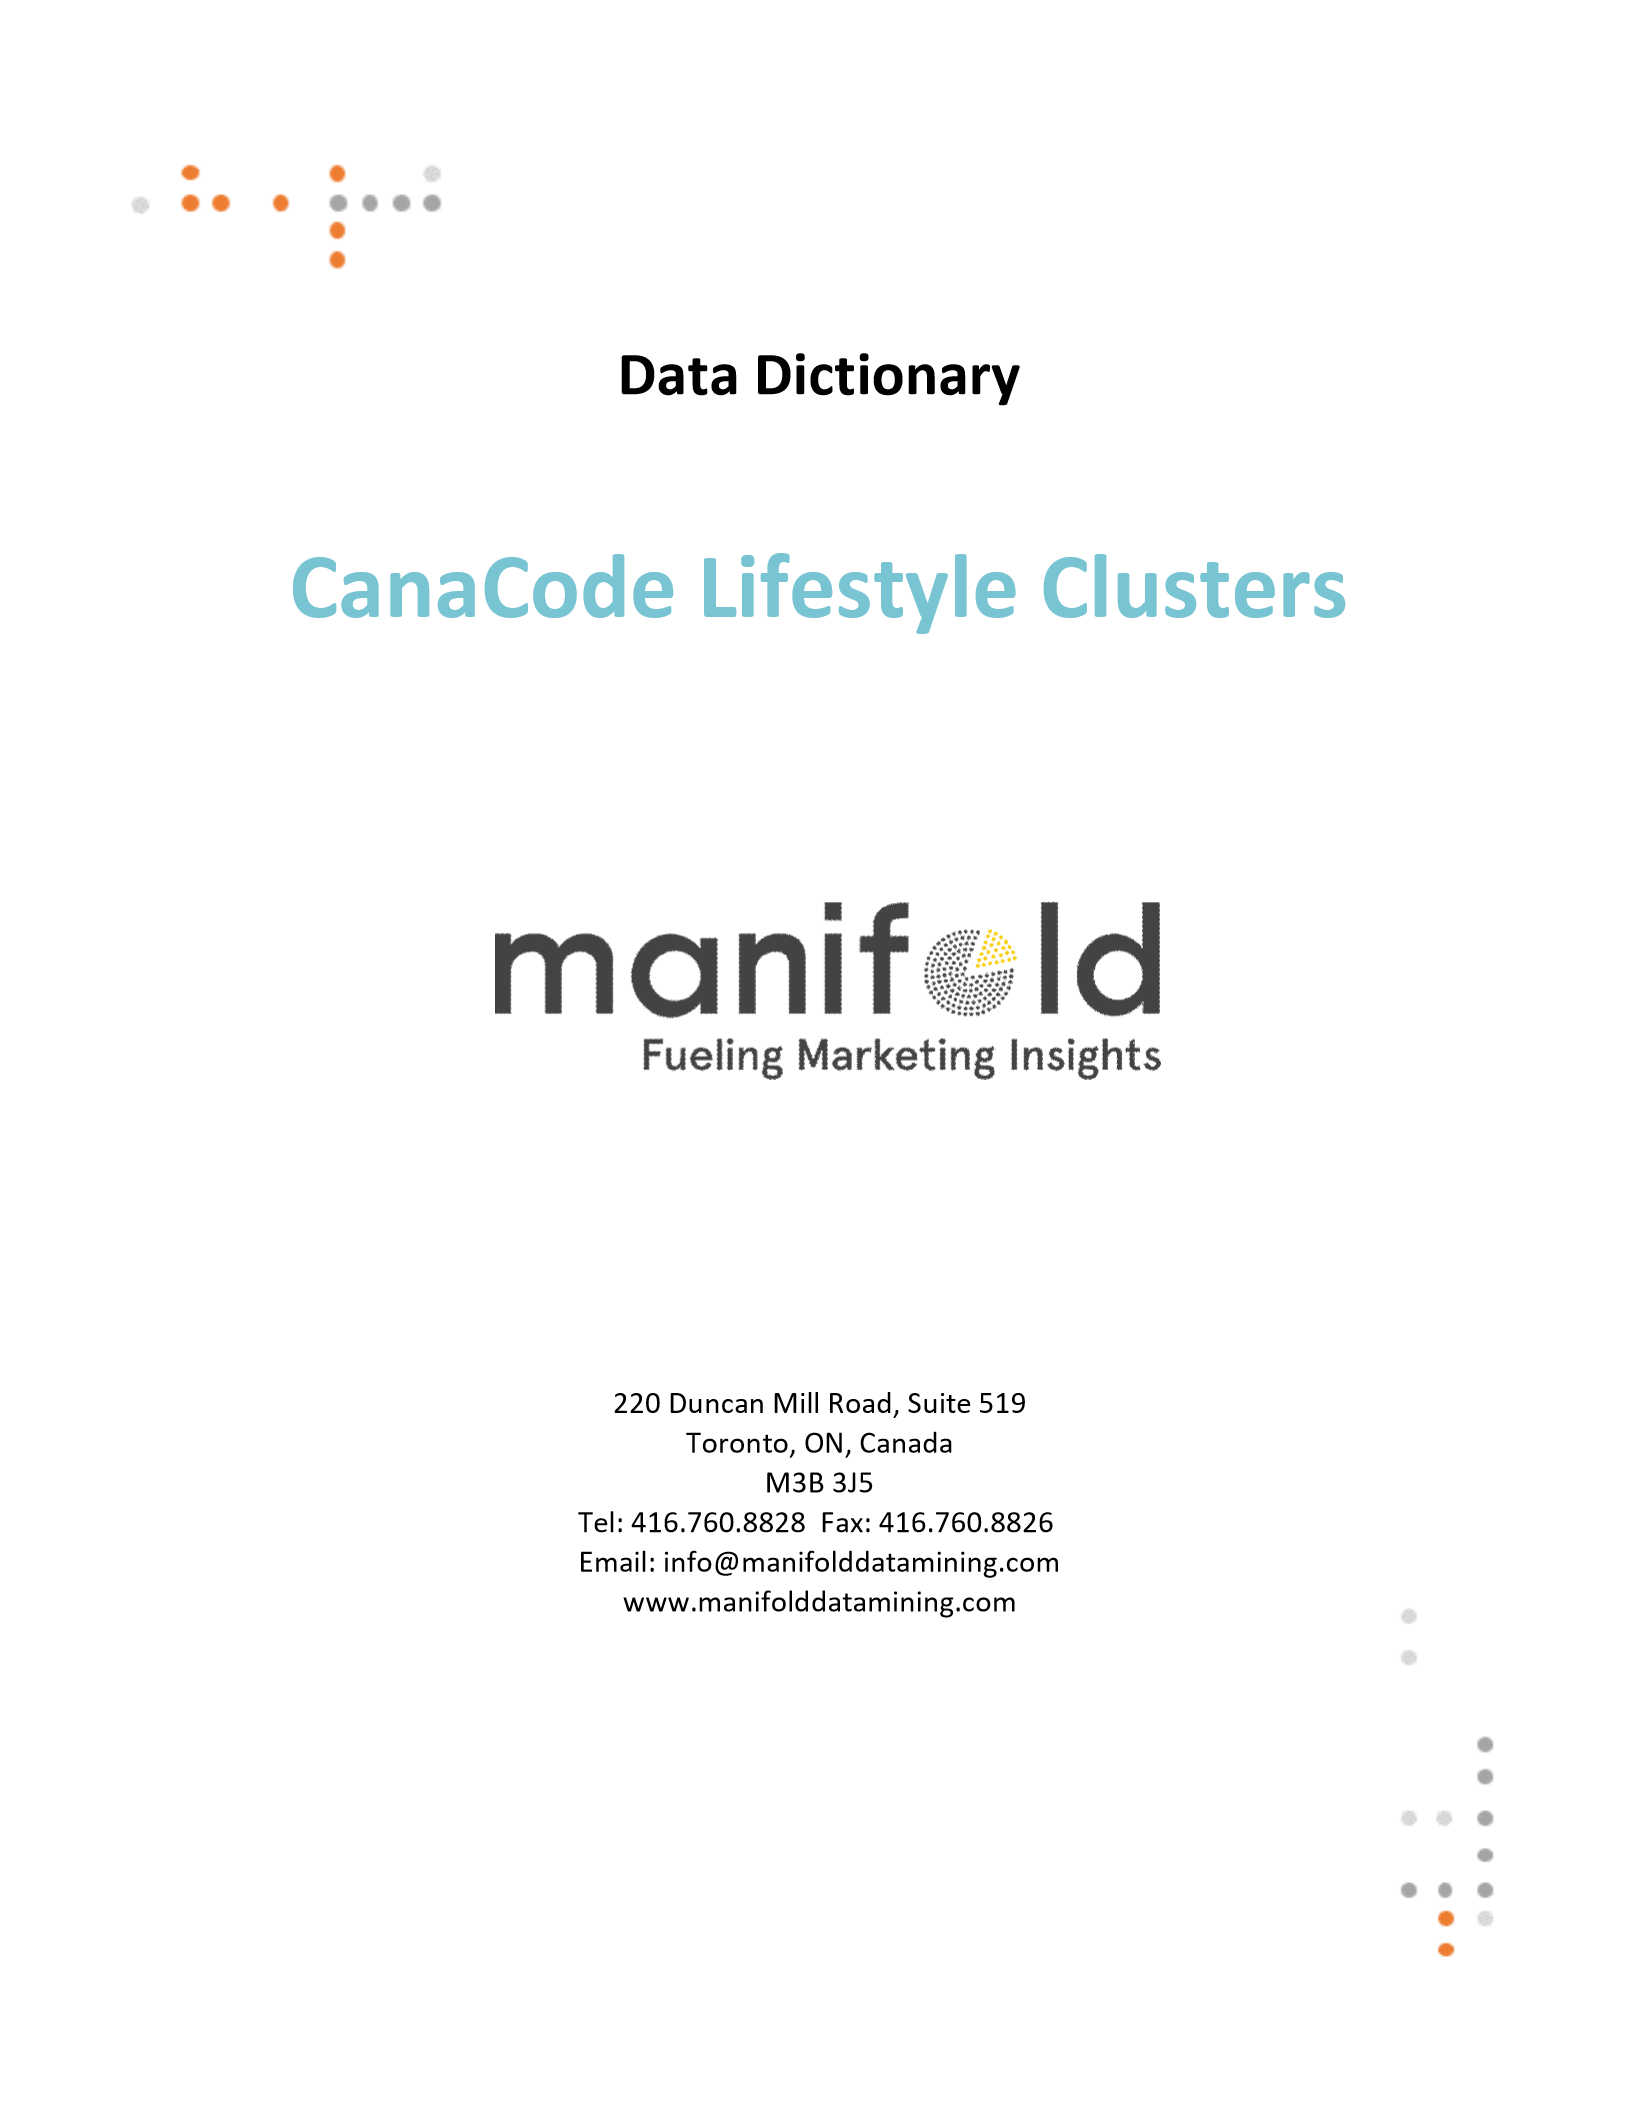 CanaCode Lifestyle Cluster